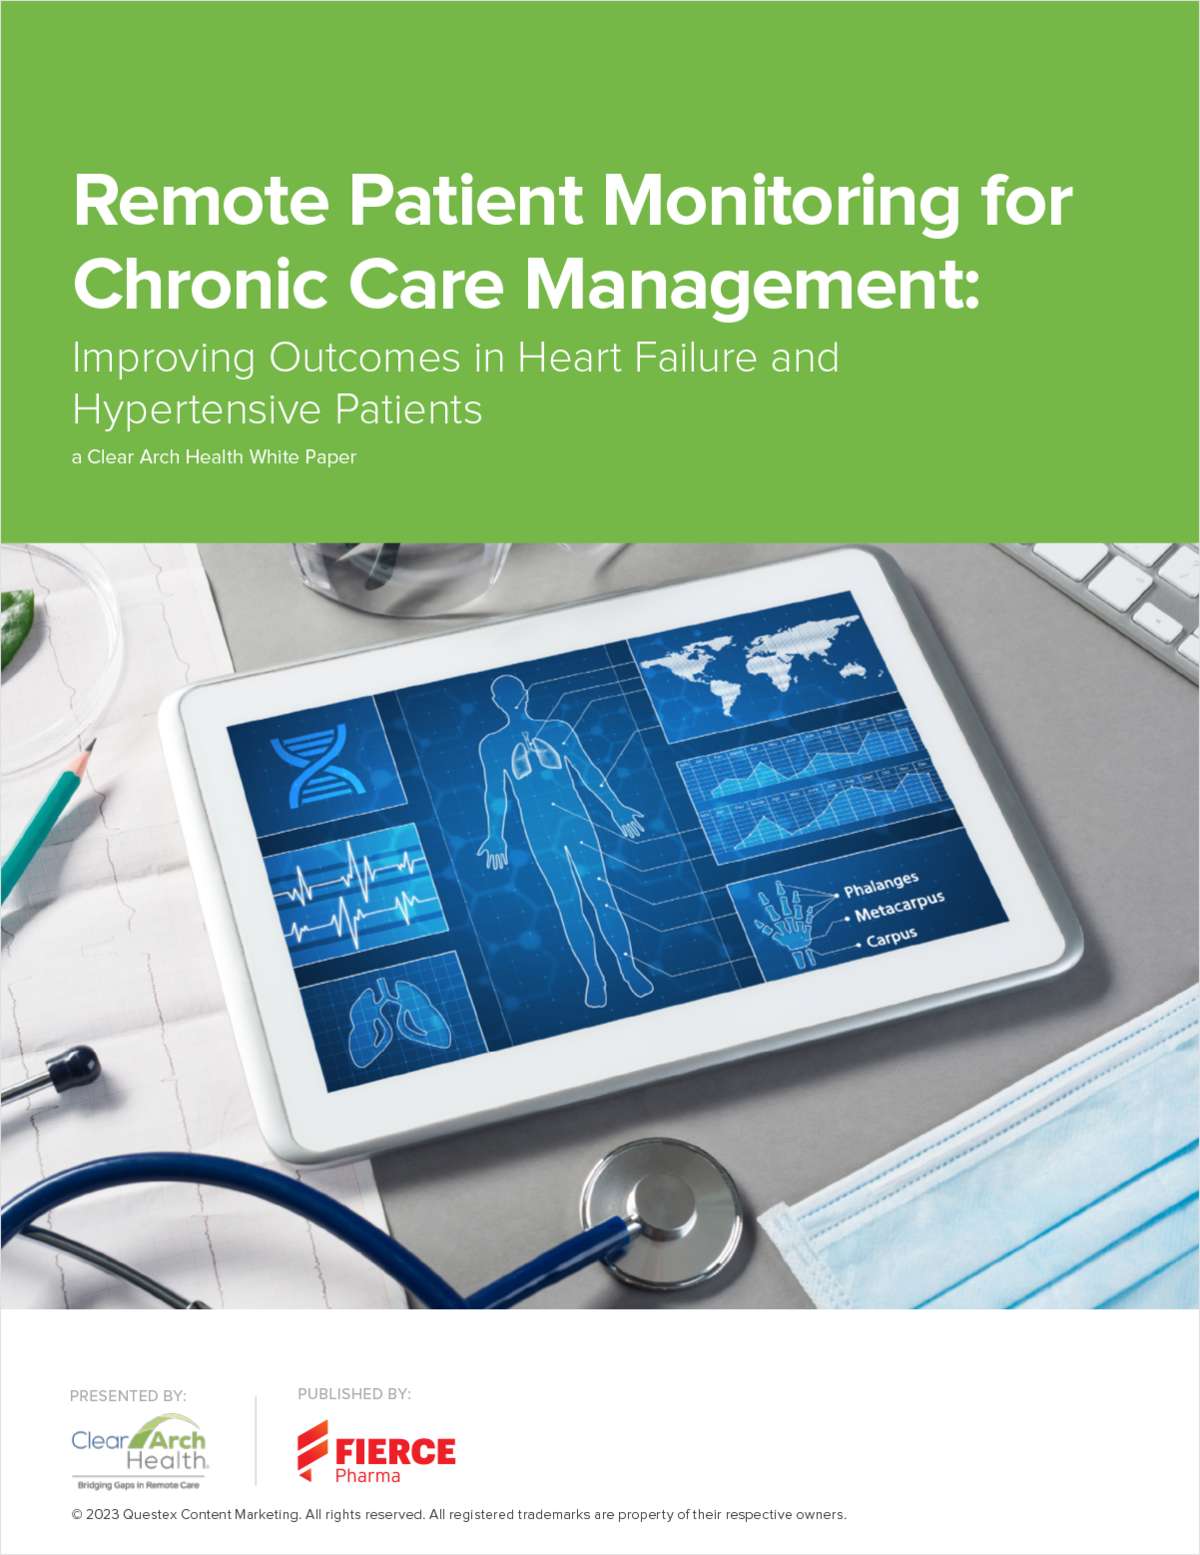 Remote Patient Monitoring for Chronic Care Management: Improving Outcomes in Heart Failure and Hypertensive Patients